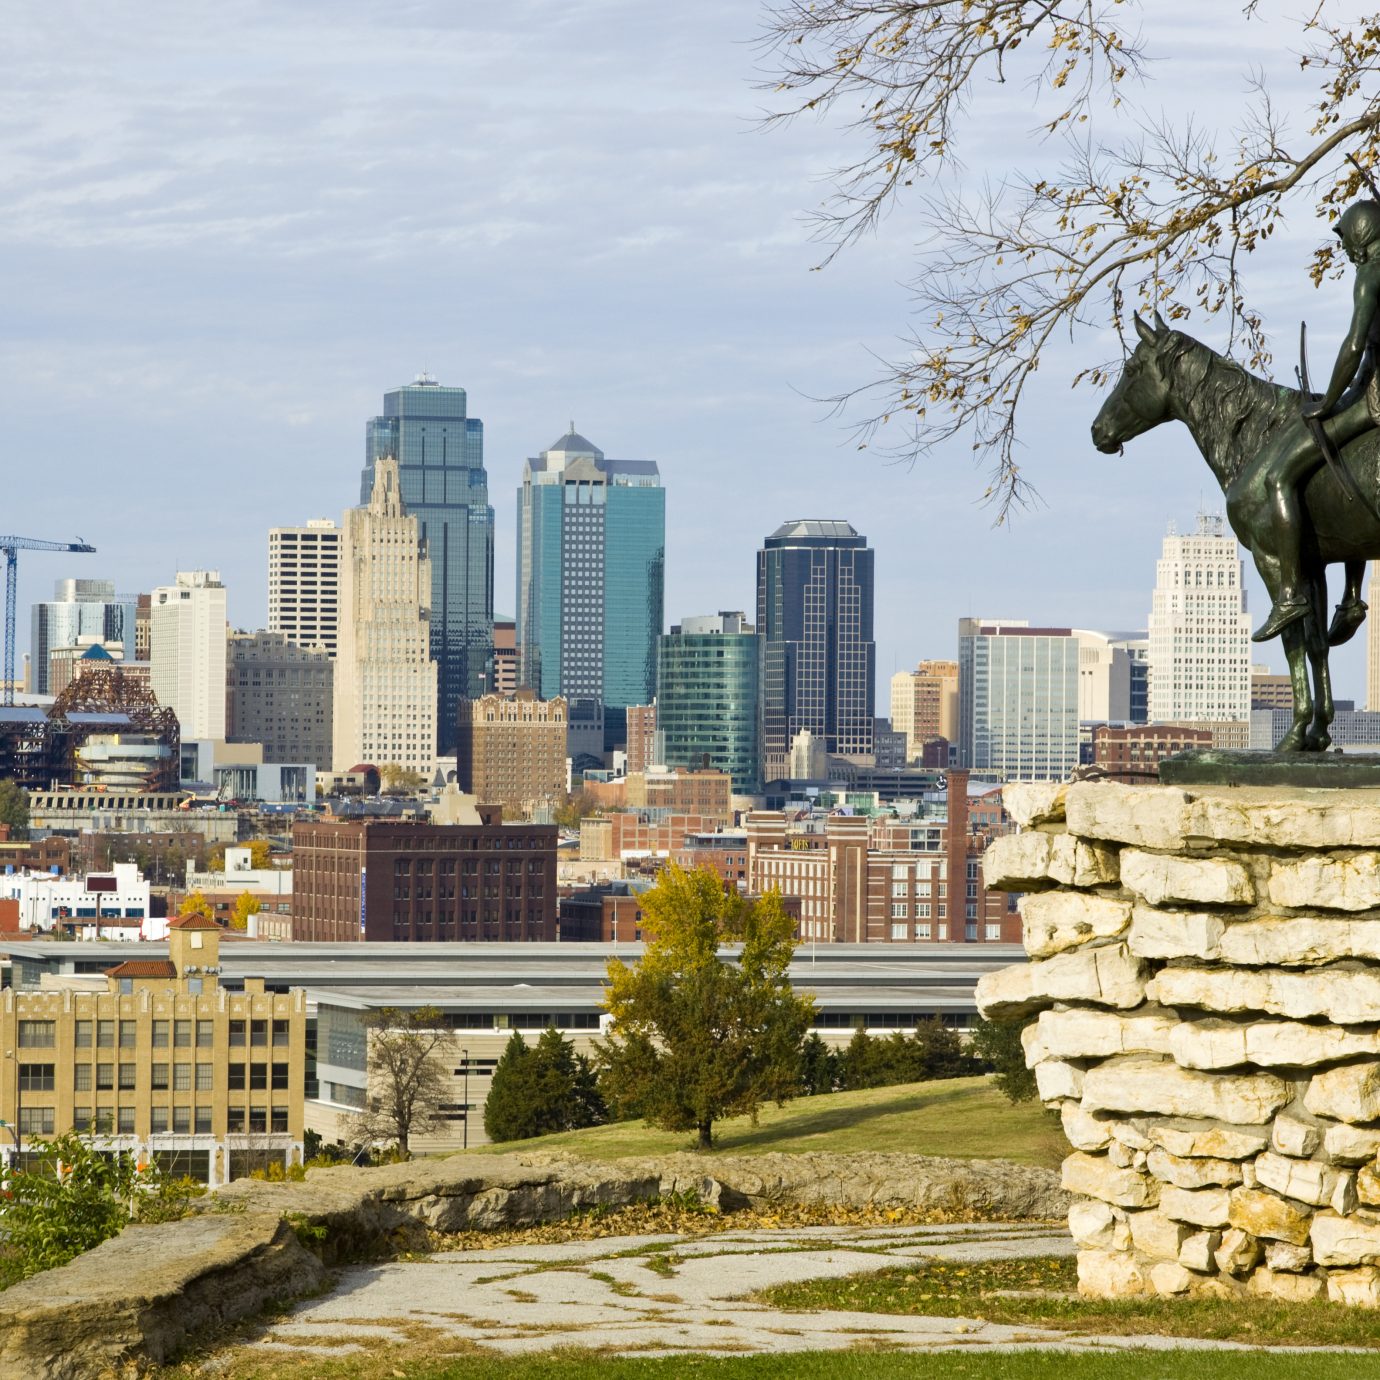 A view of downtown Kansas City, Missouri with the Scout statue in the foreground